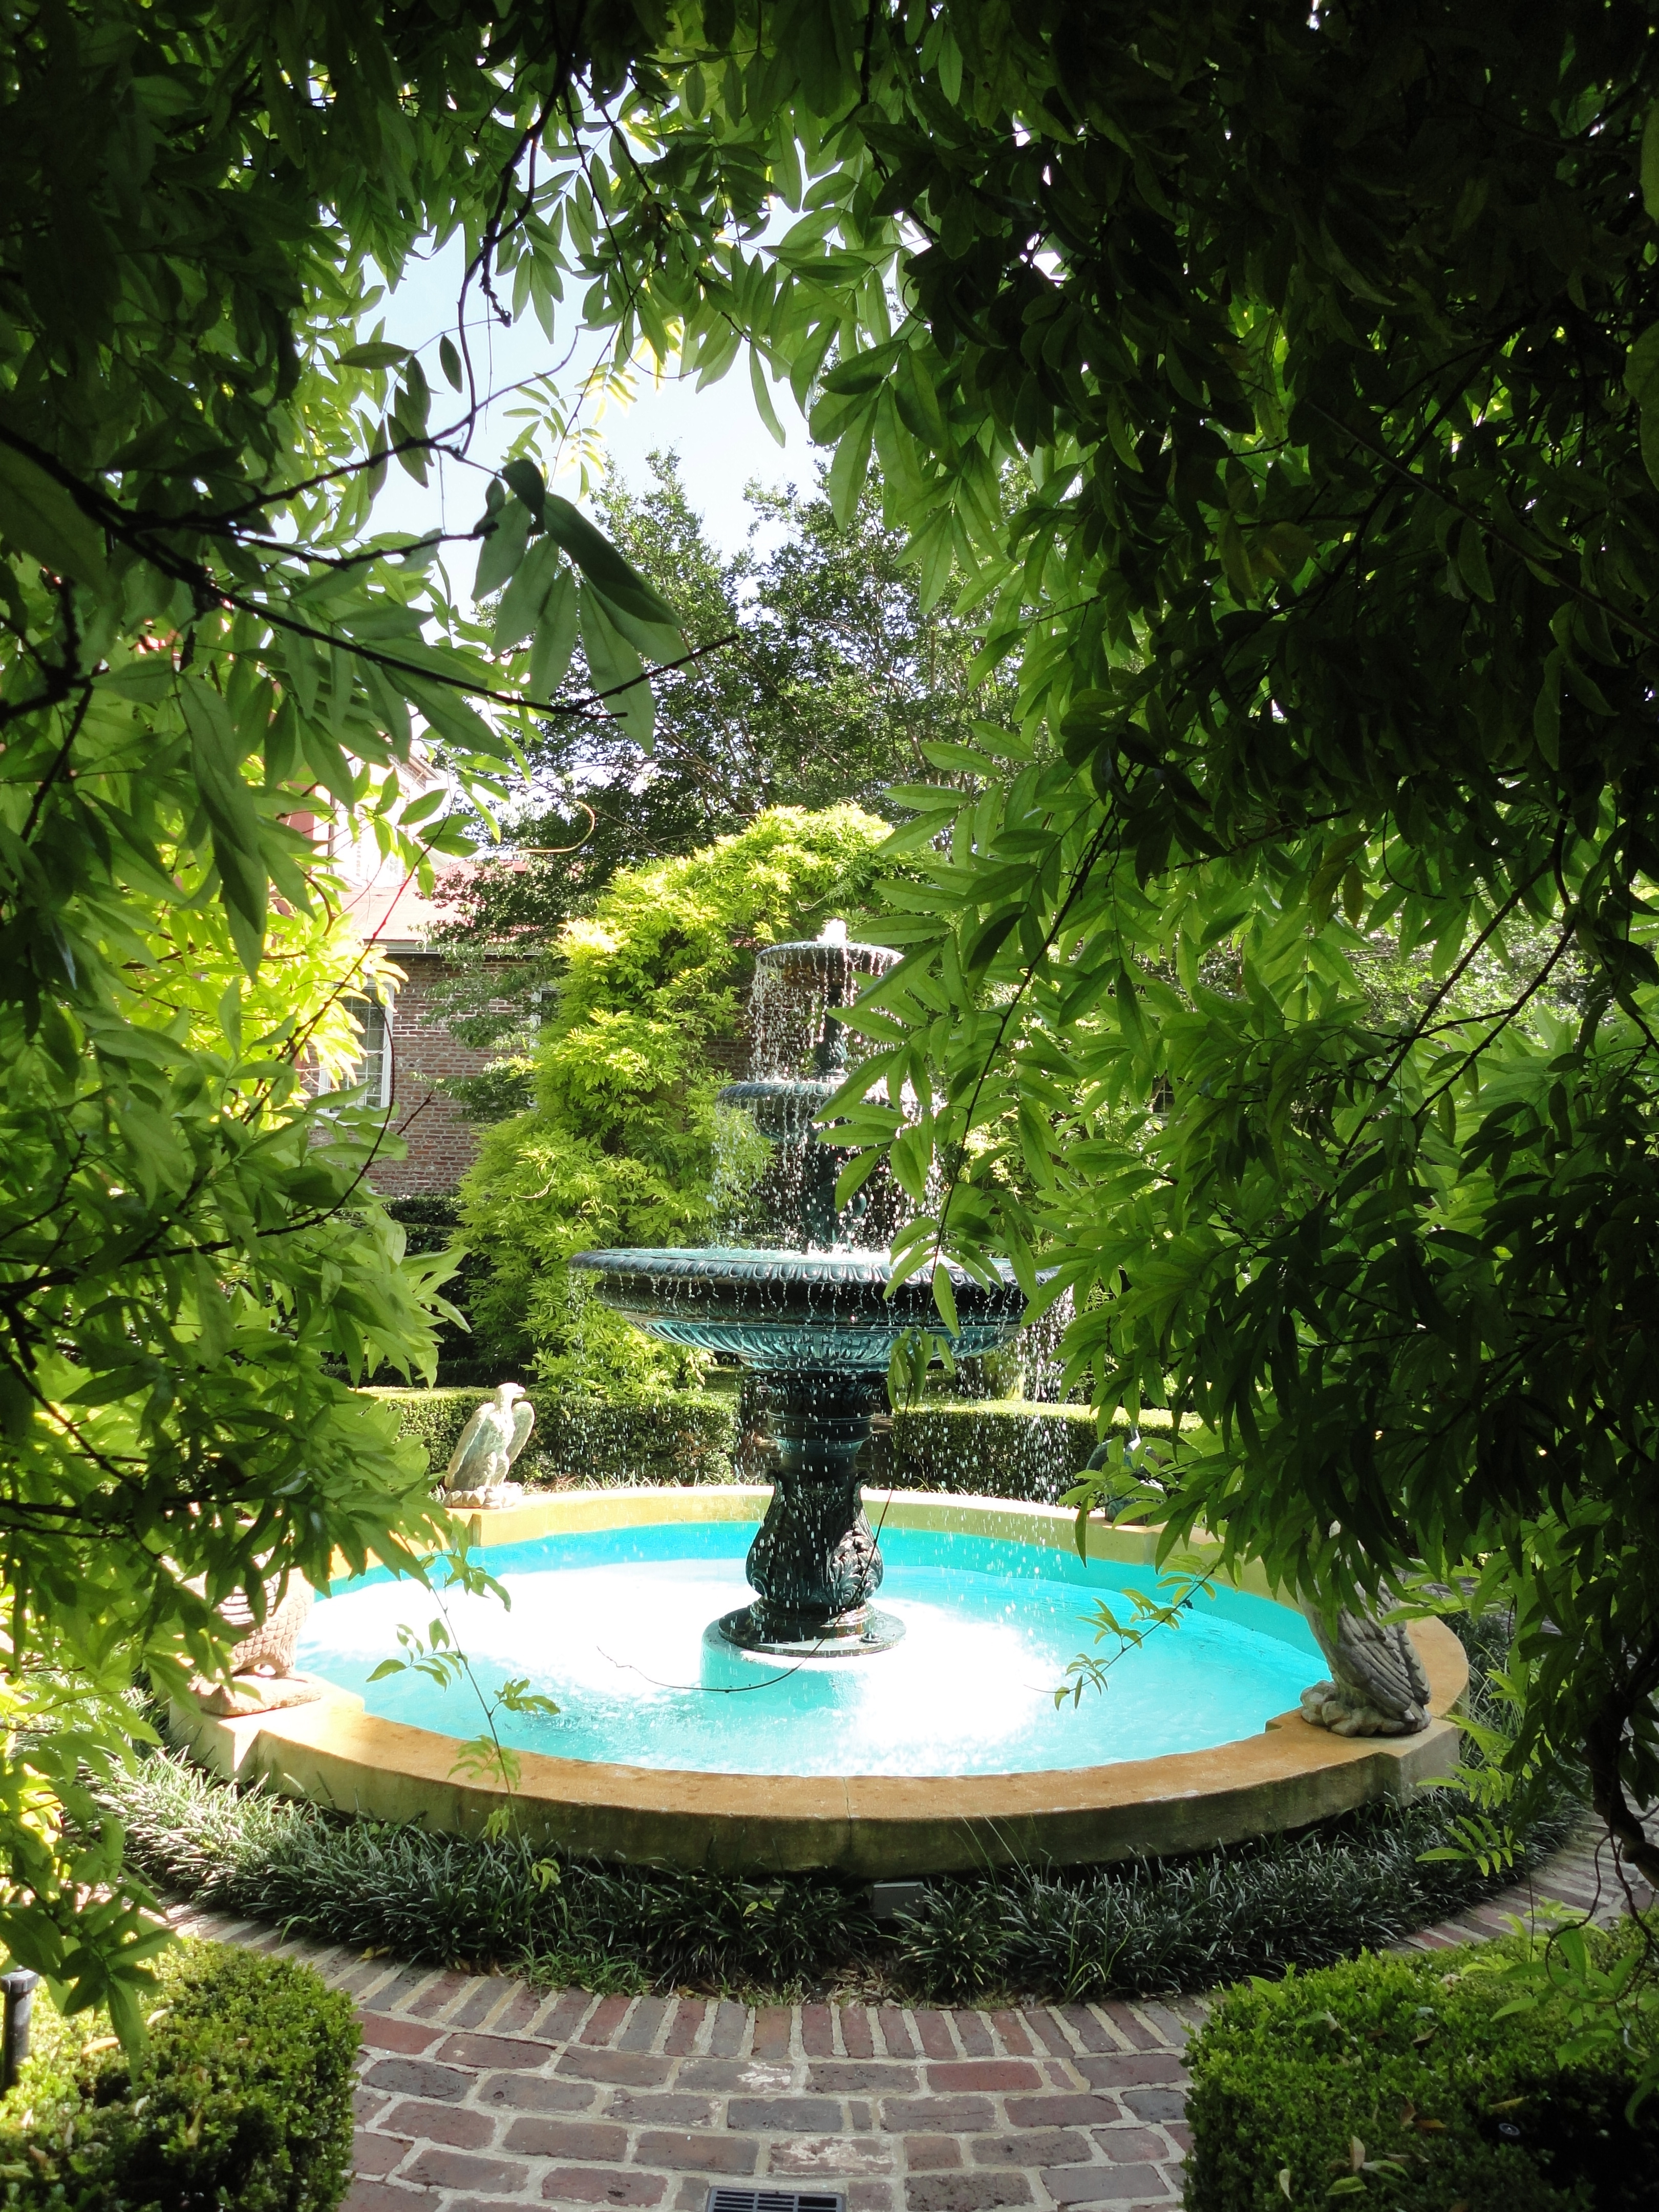 Lovely fountain with pool in a courtyard garden in Charleston